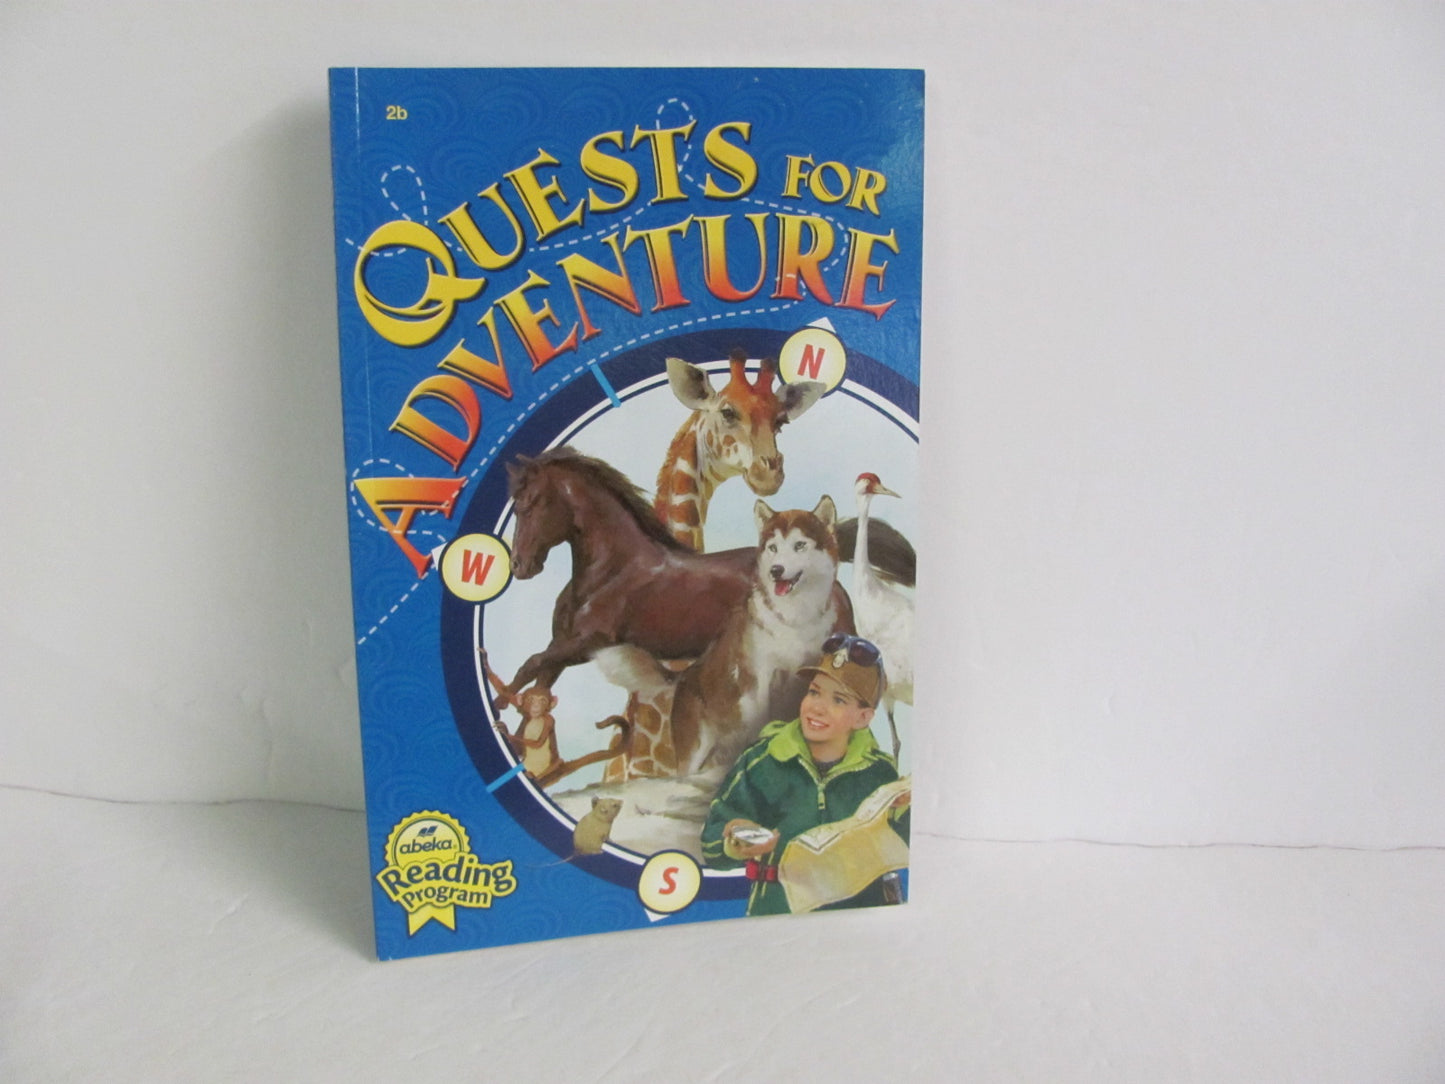 Quests for Adventure Abeka Student Book Pre-Owned 2nd Grade Reading Textbooks